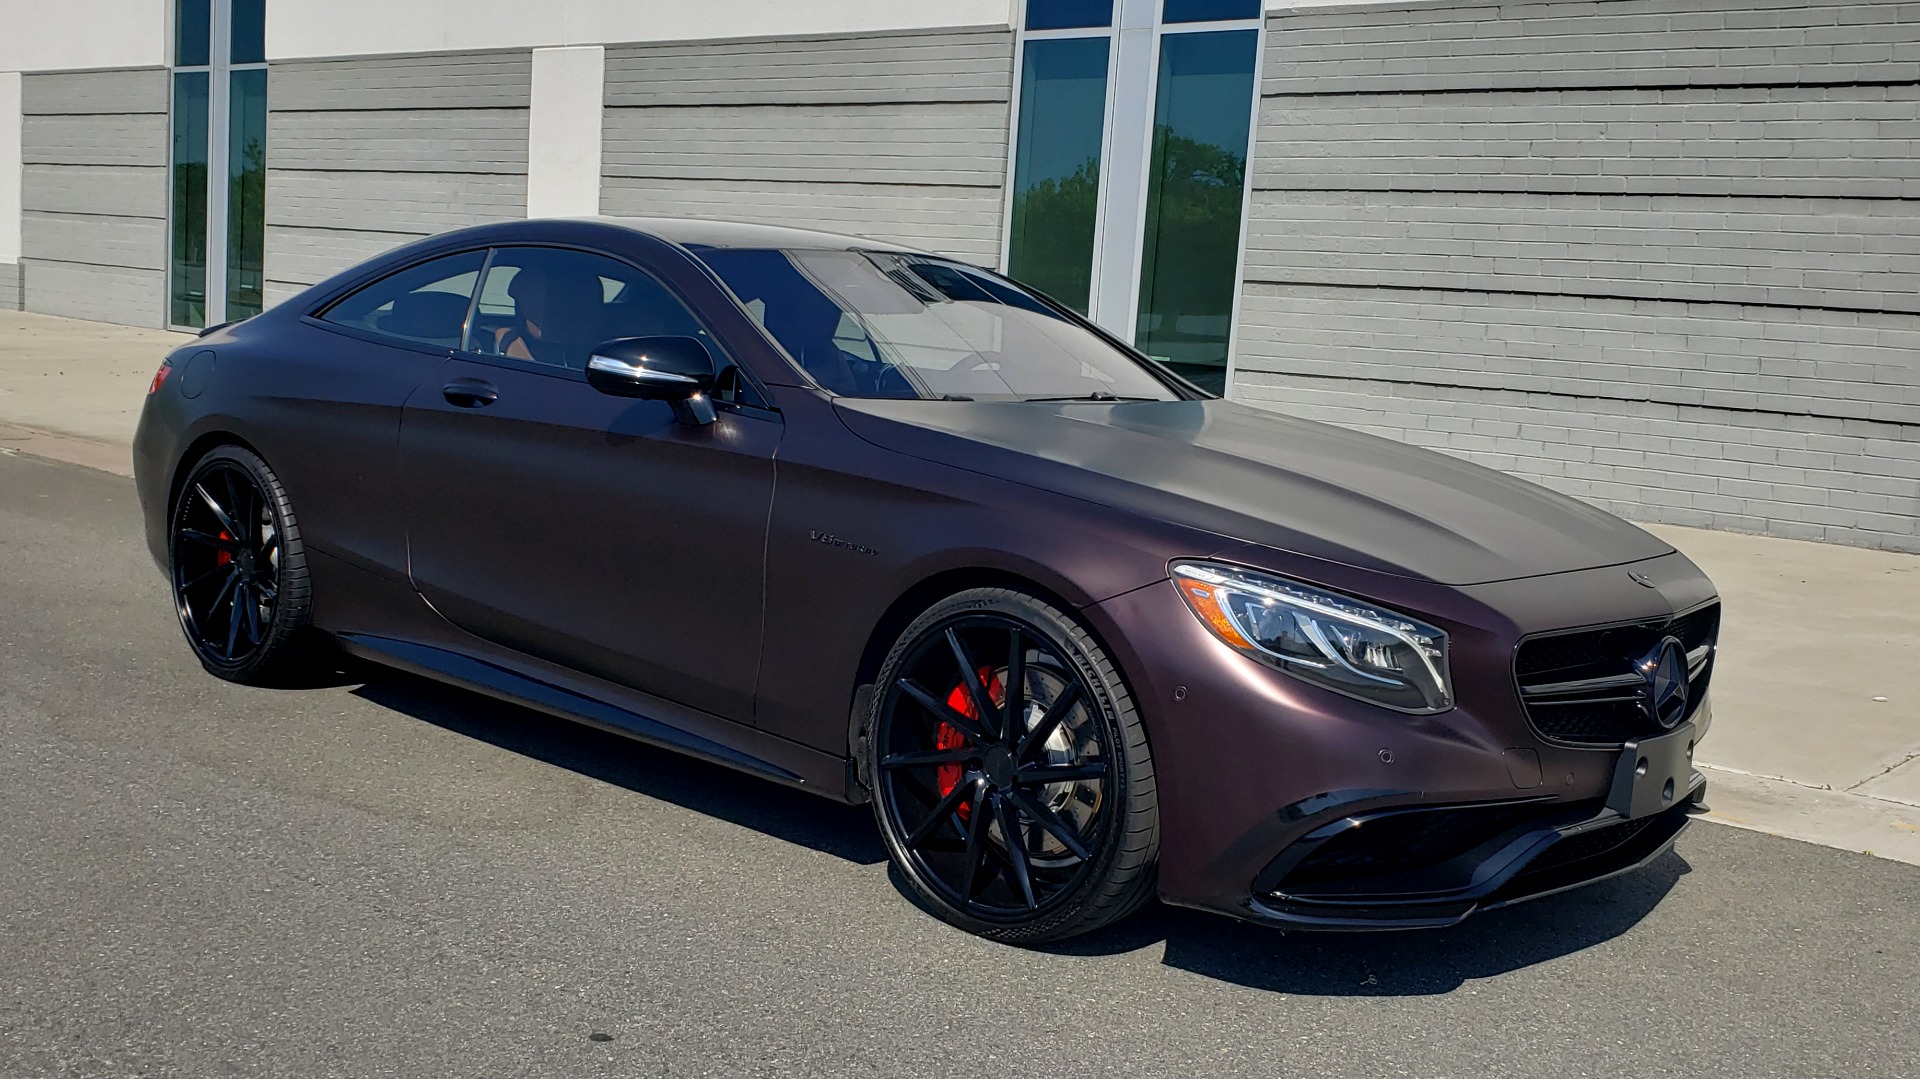 Used 2017 Mercedes-Benz S-CLASS AMG S 63 / NAV / SUNROOF / CUSTOM WRAP / BLACK VOSSEN WHEELS for sale Sold at Formula Imports in Charlotte NC 28227 10